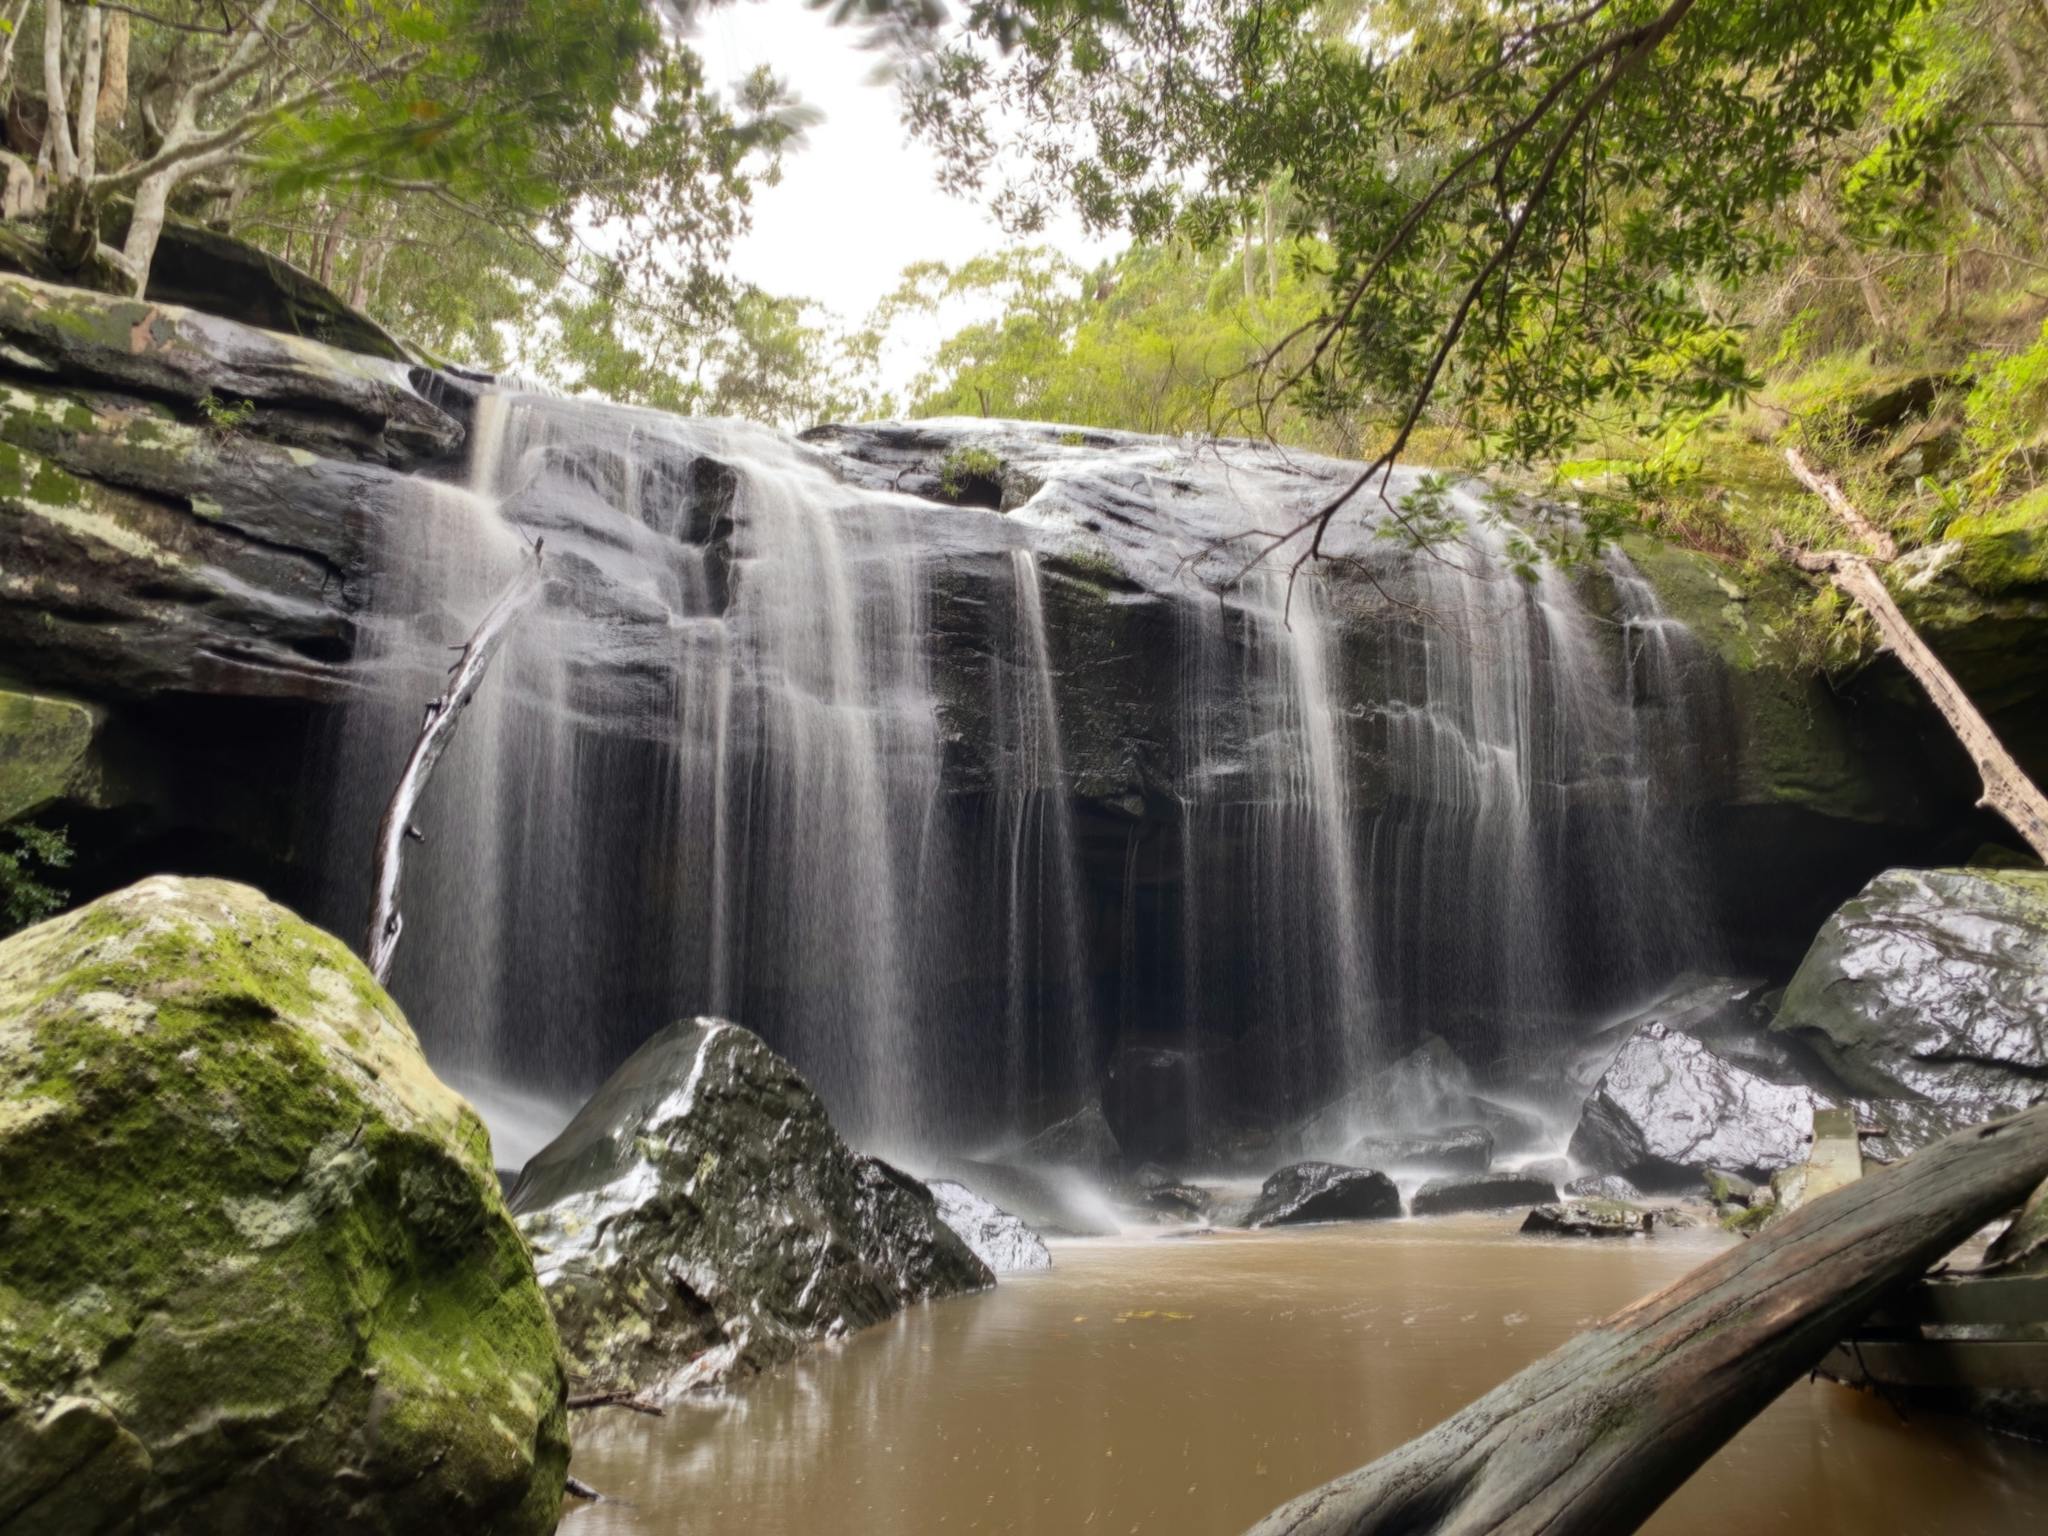 A waterfall on Little Flaggy Creek, with a curtain of water tumbling 4m over a sandstone cliff